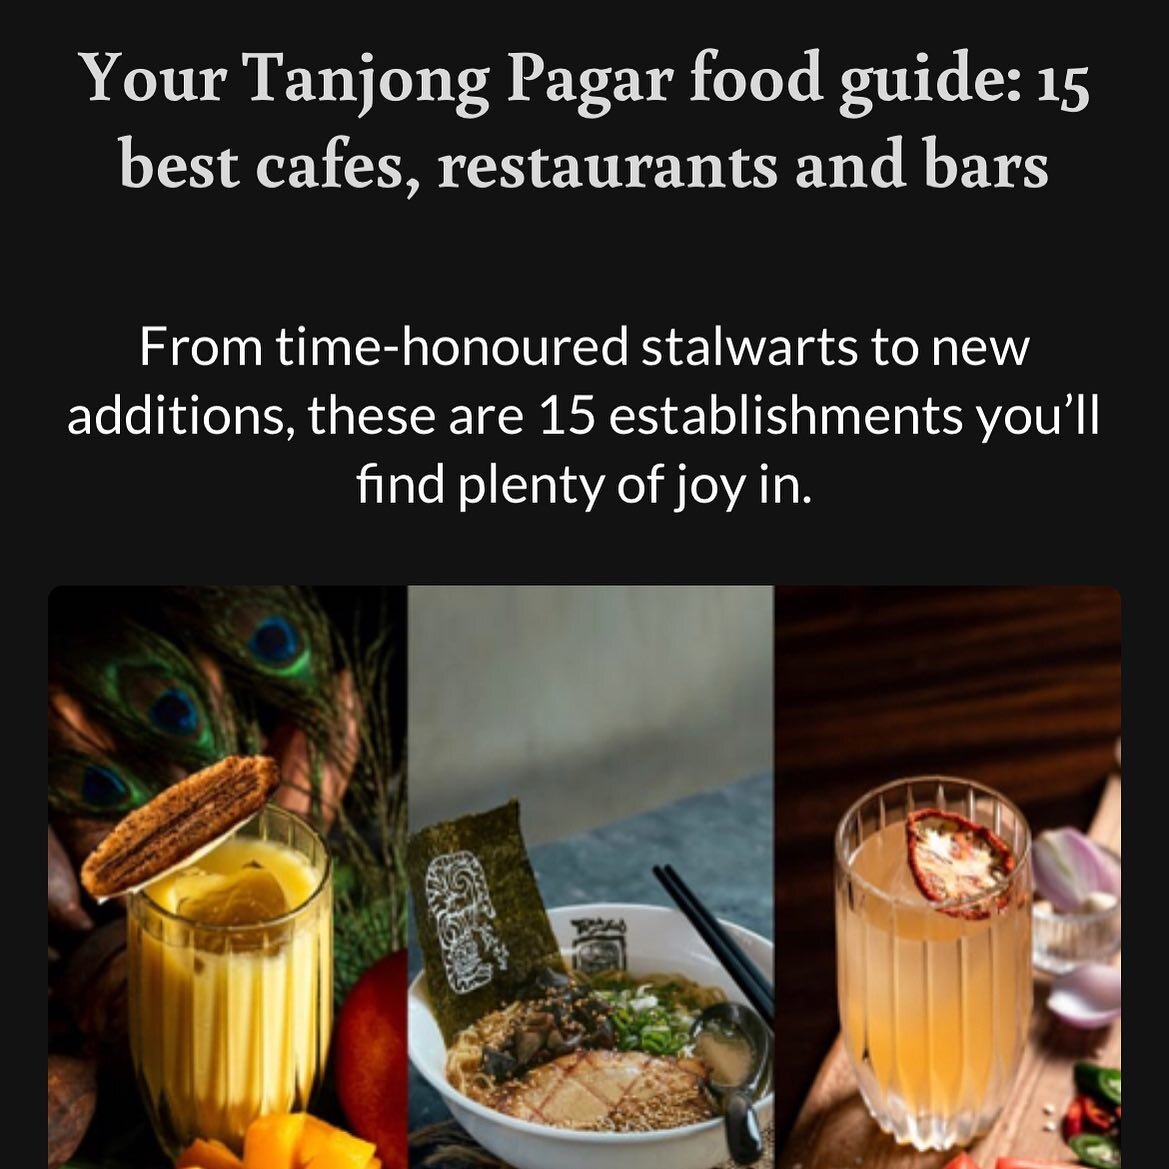 Thank you @channelnewsasia for the feature in your best 15 cafes, restaurants and bars in Tanjong Pagar!
Link in bio ^
.
We&rsquo;re super stoked to bring more you more exciting coffees, pastries, brunch, dinner and desserts! 
.
Reservations via www.